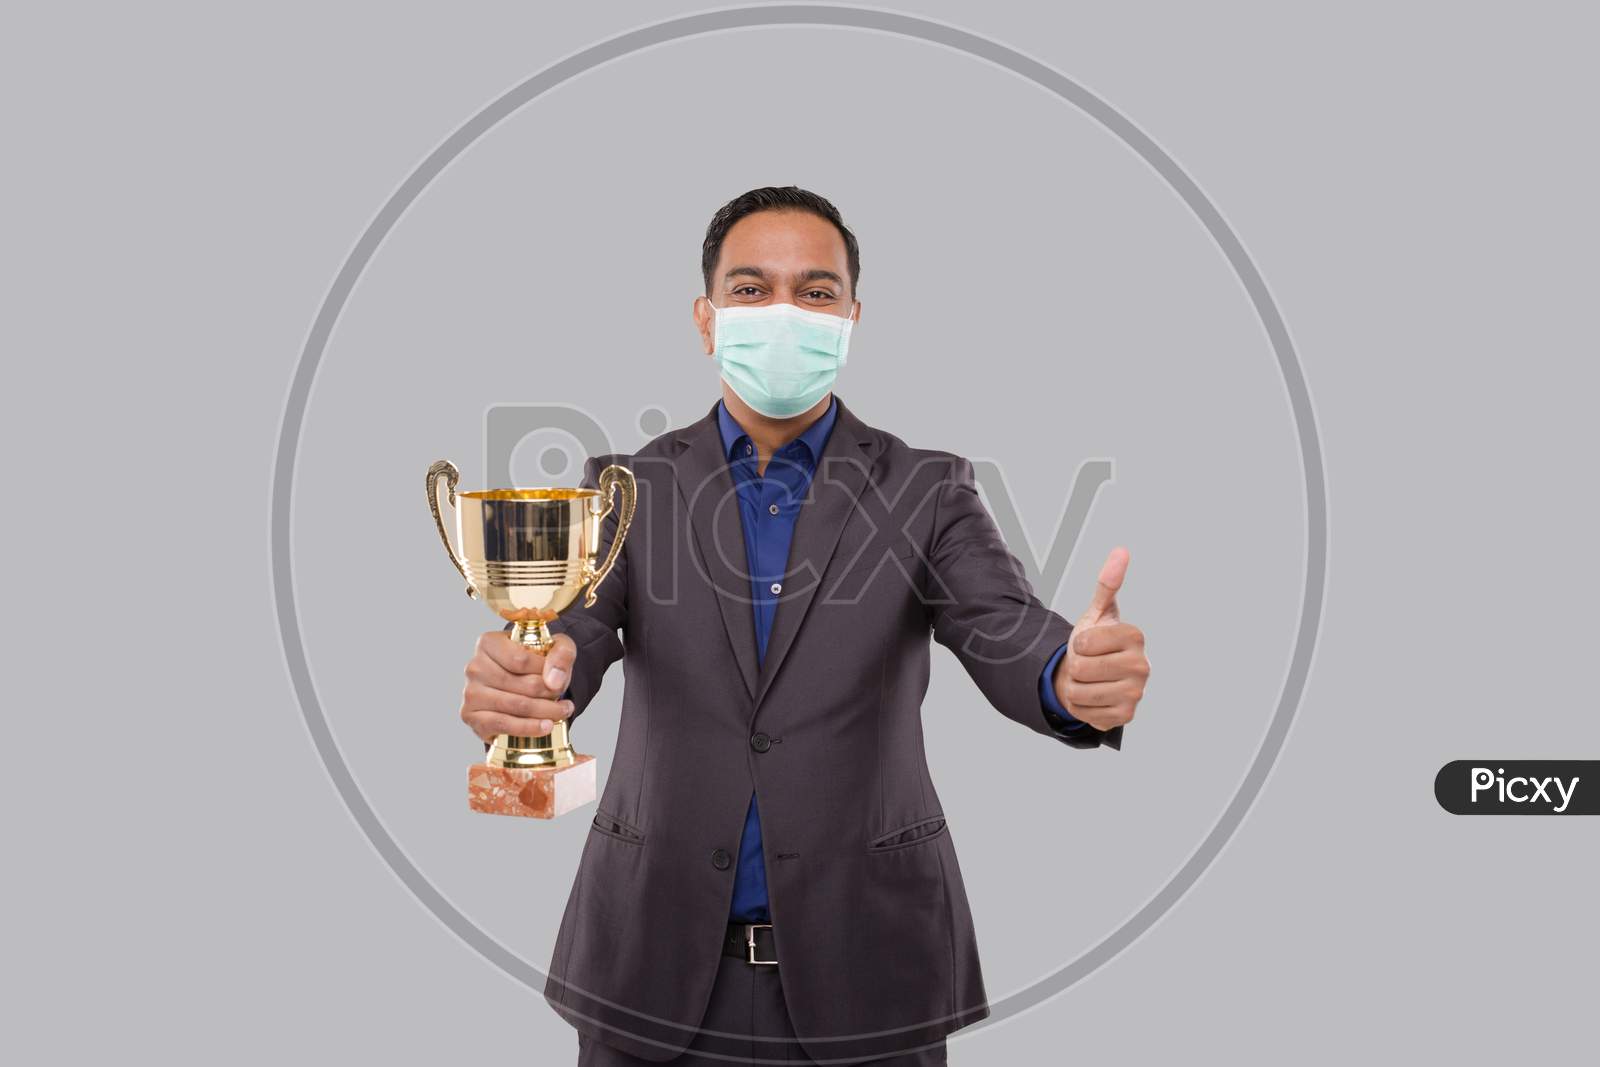 Businessman Holding Trophy Wearing Medical Mask Showing Thumbp Up. Indian Business Man Standing With Trophy In Hands